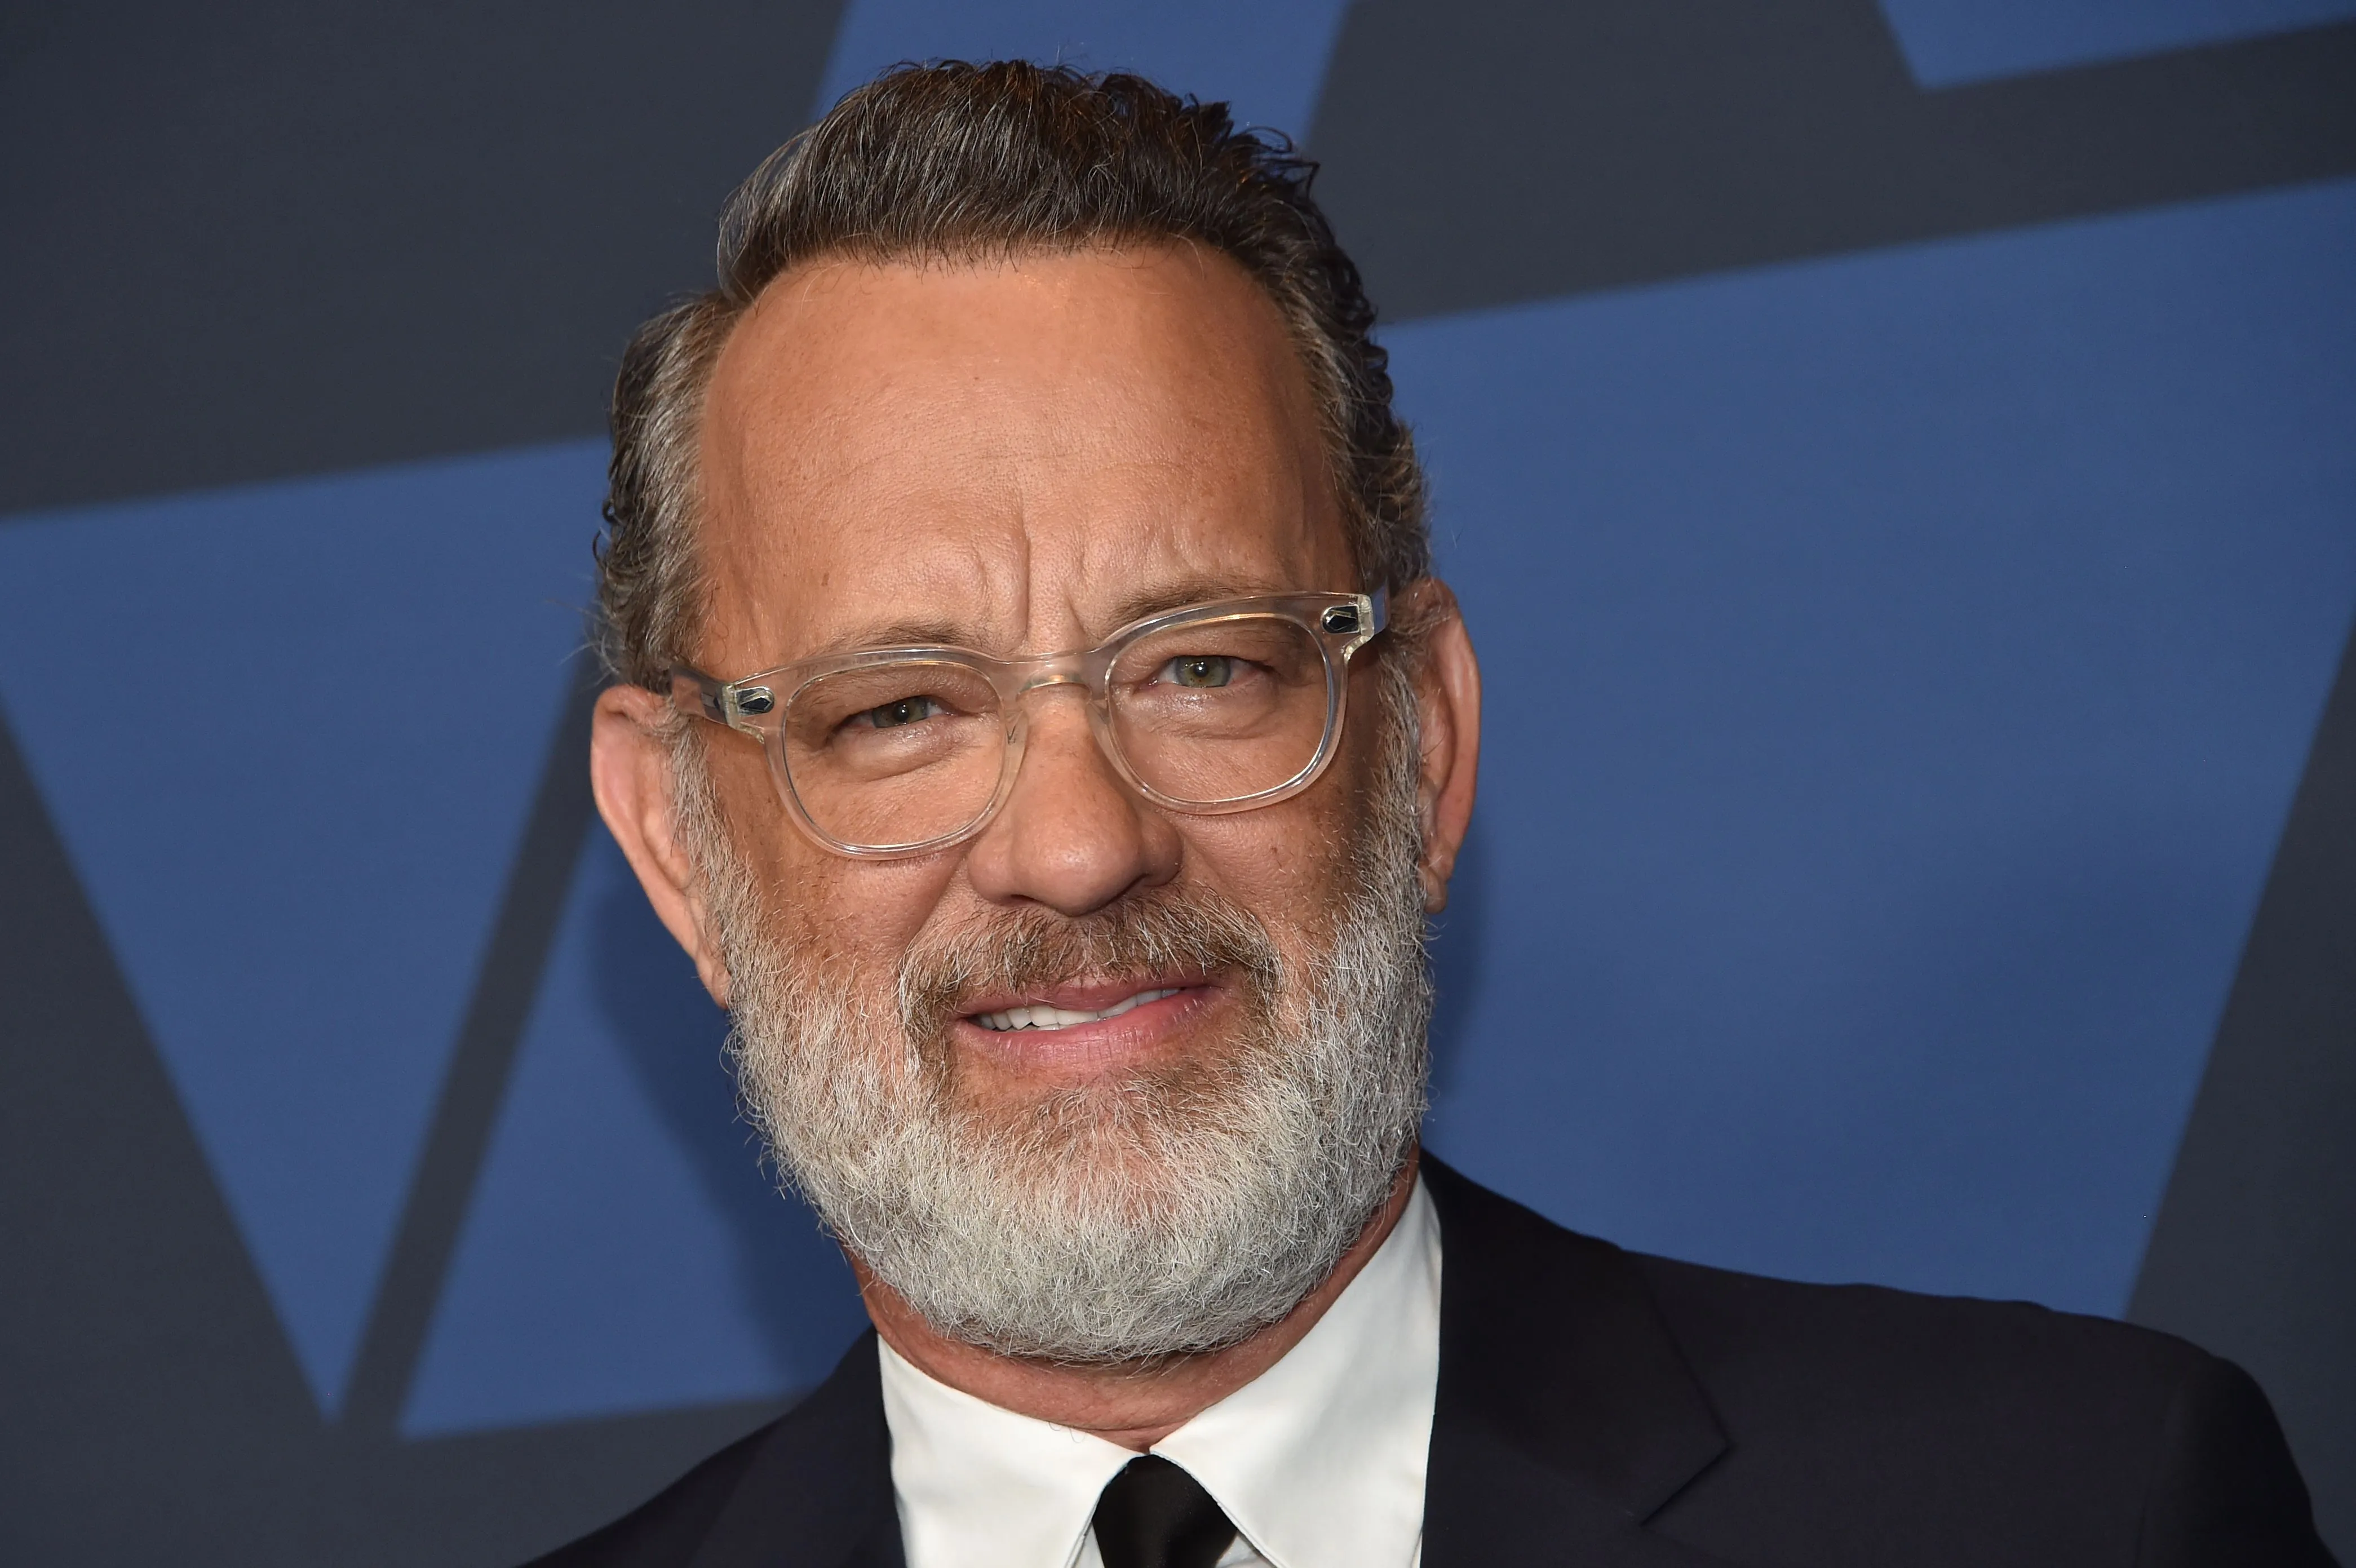 Tom Hanks now boasts a fuller hairline after getting a hair transplant